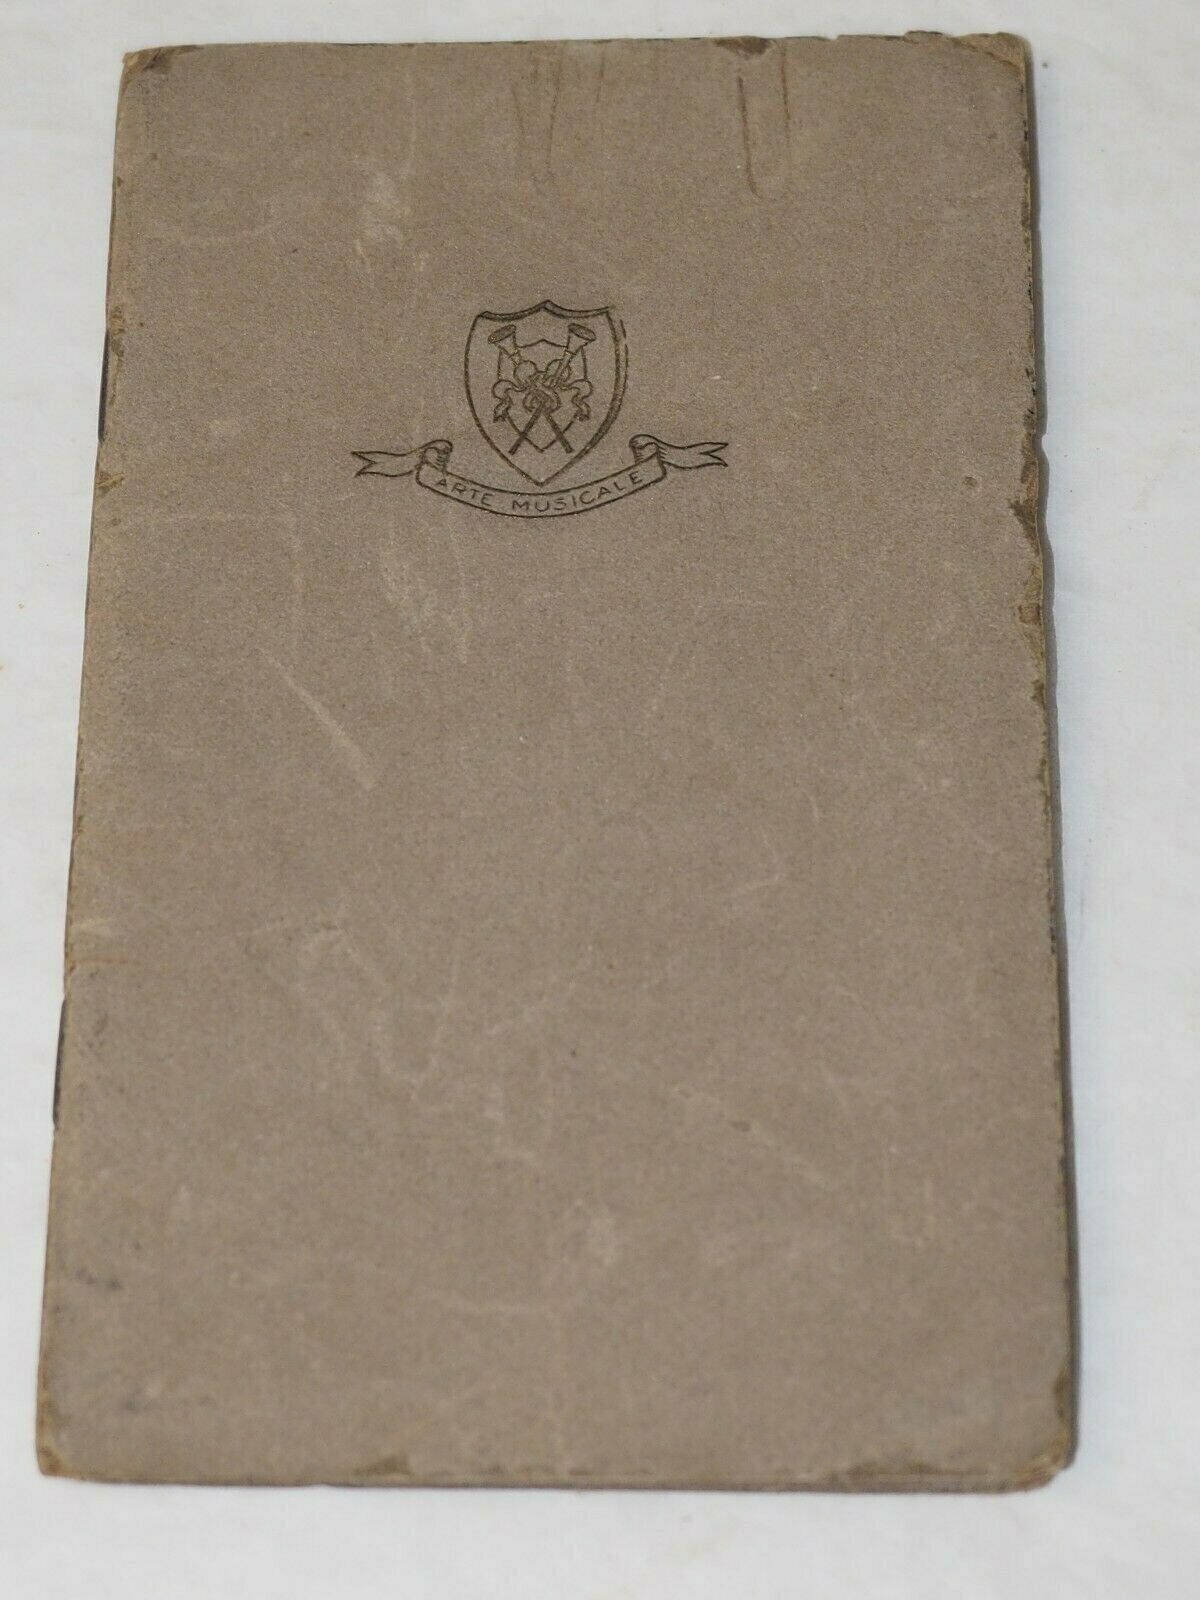 1931-1932 MUSICAL ARTS CLUB long beach Cal.By-Laws Officers Constitution Booklet